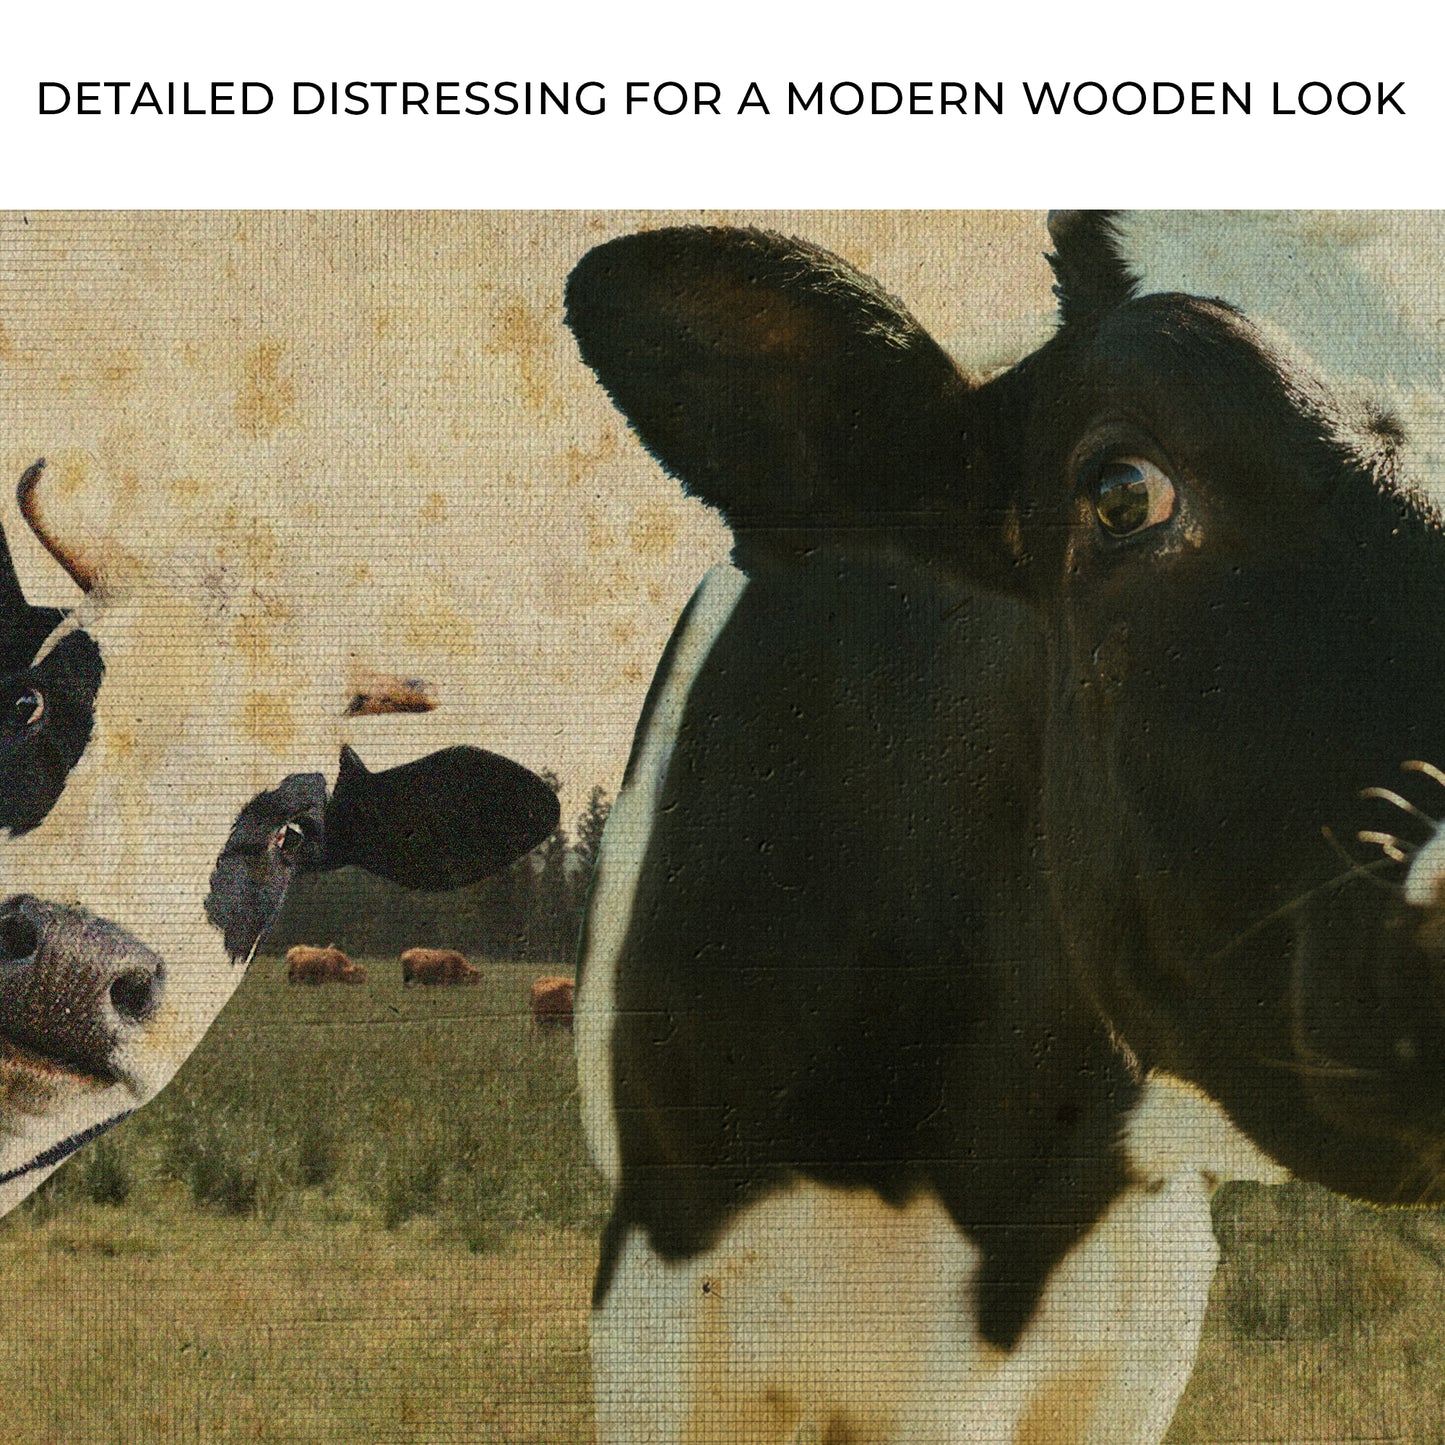 Rustic Curious Cows Canvas Wall Art Zoom - Image by Tailored Canvases